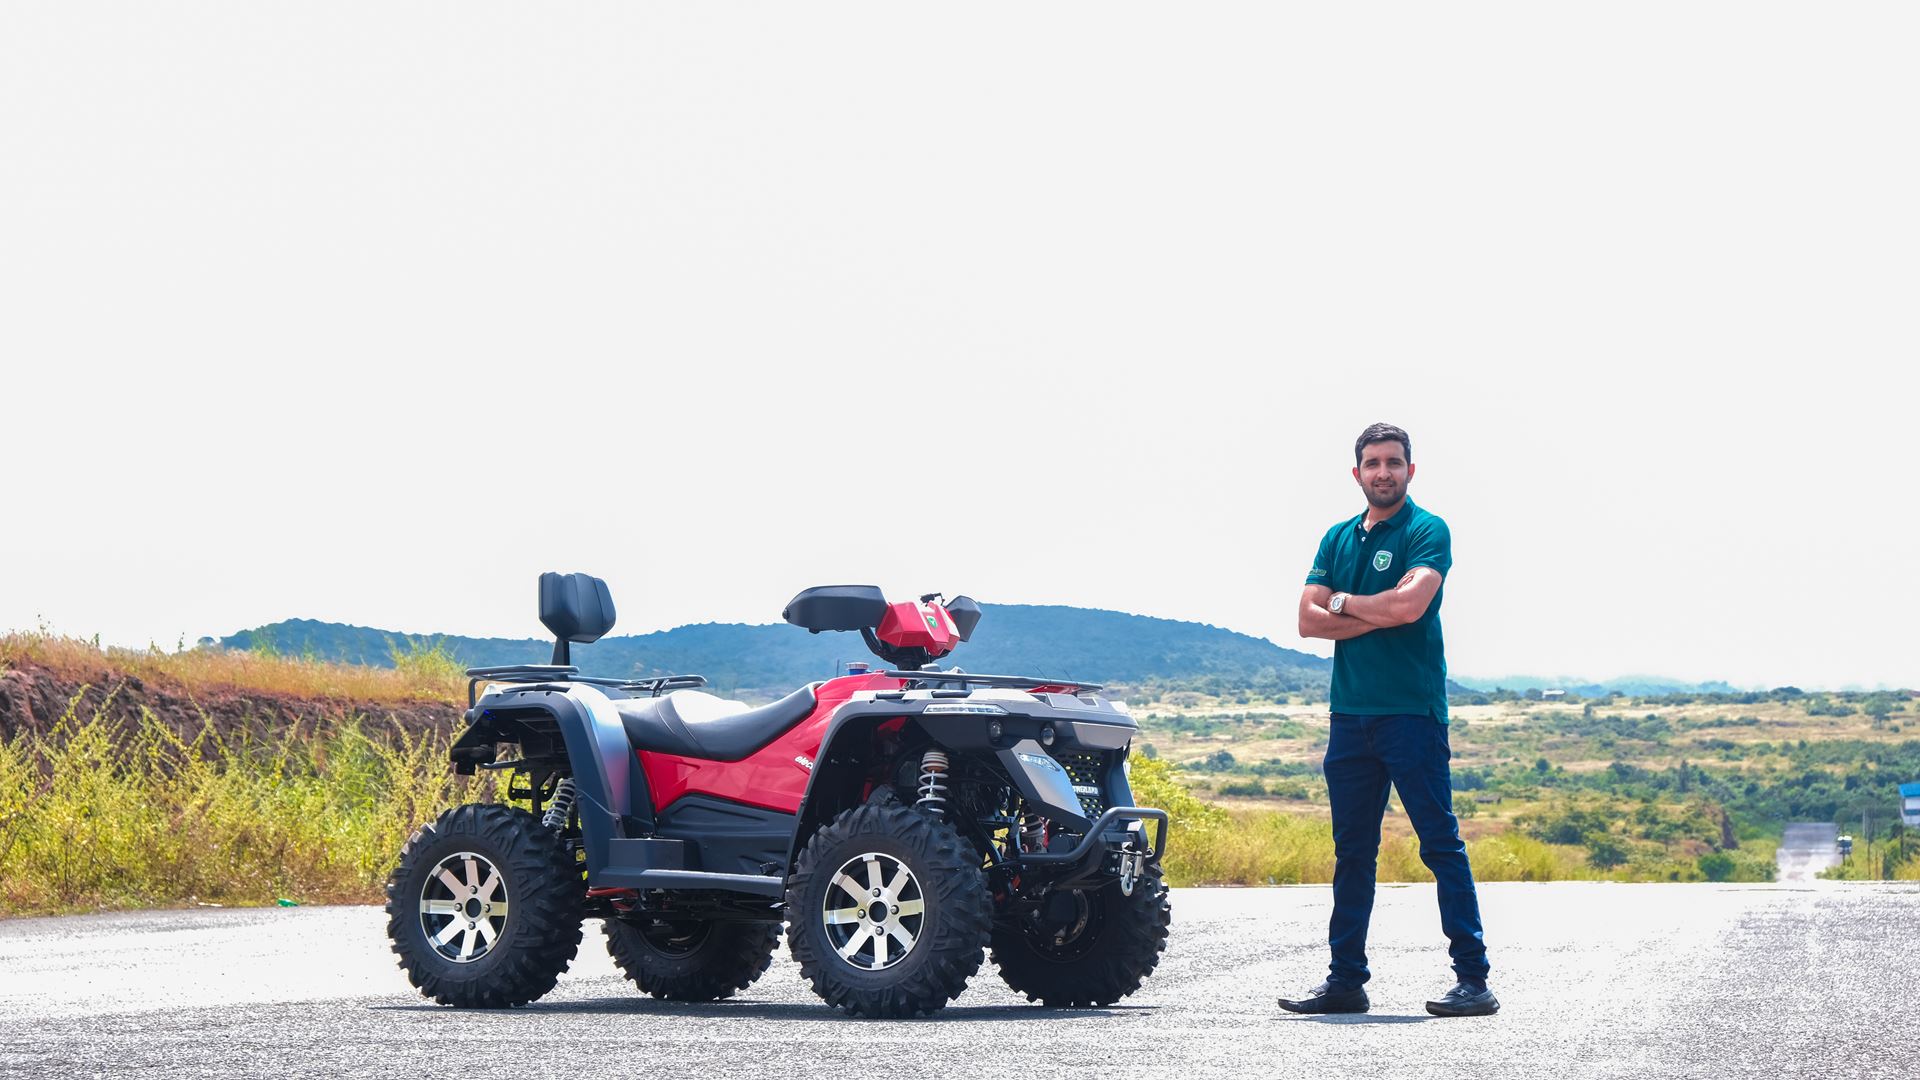 India's Powerland Goes Global With Electric ATVs and UTVs - CEO &  Co-Founder, Tej Naik